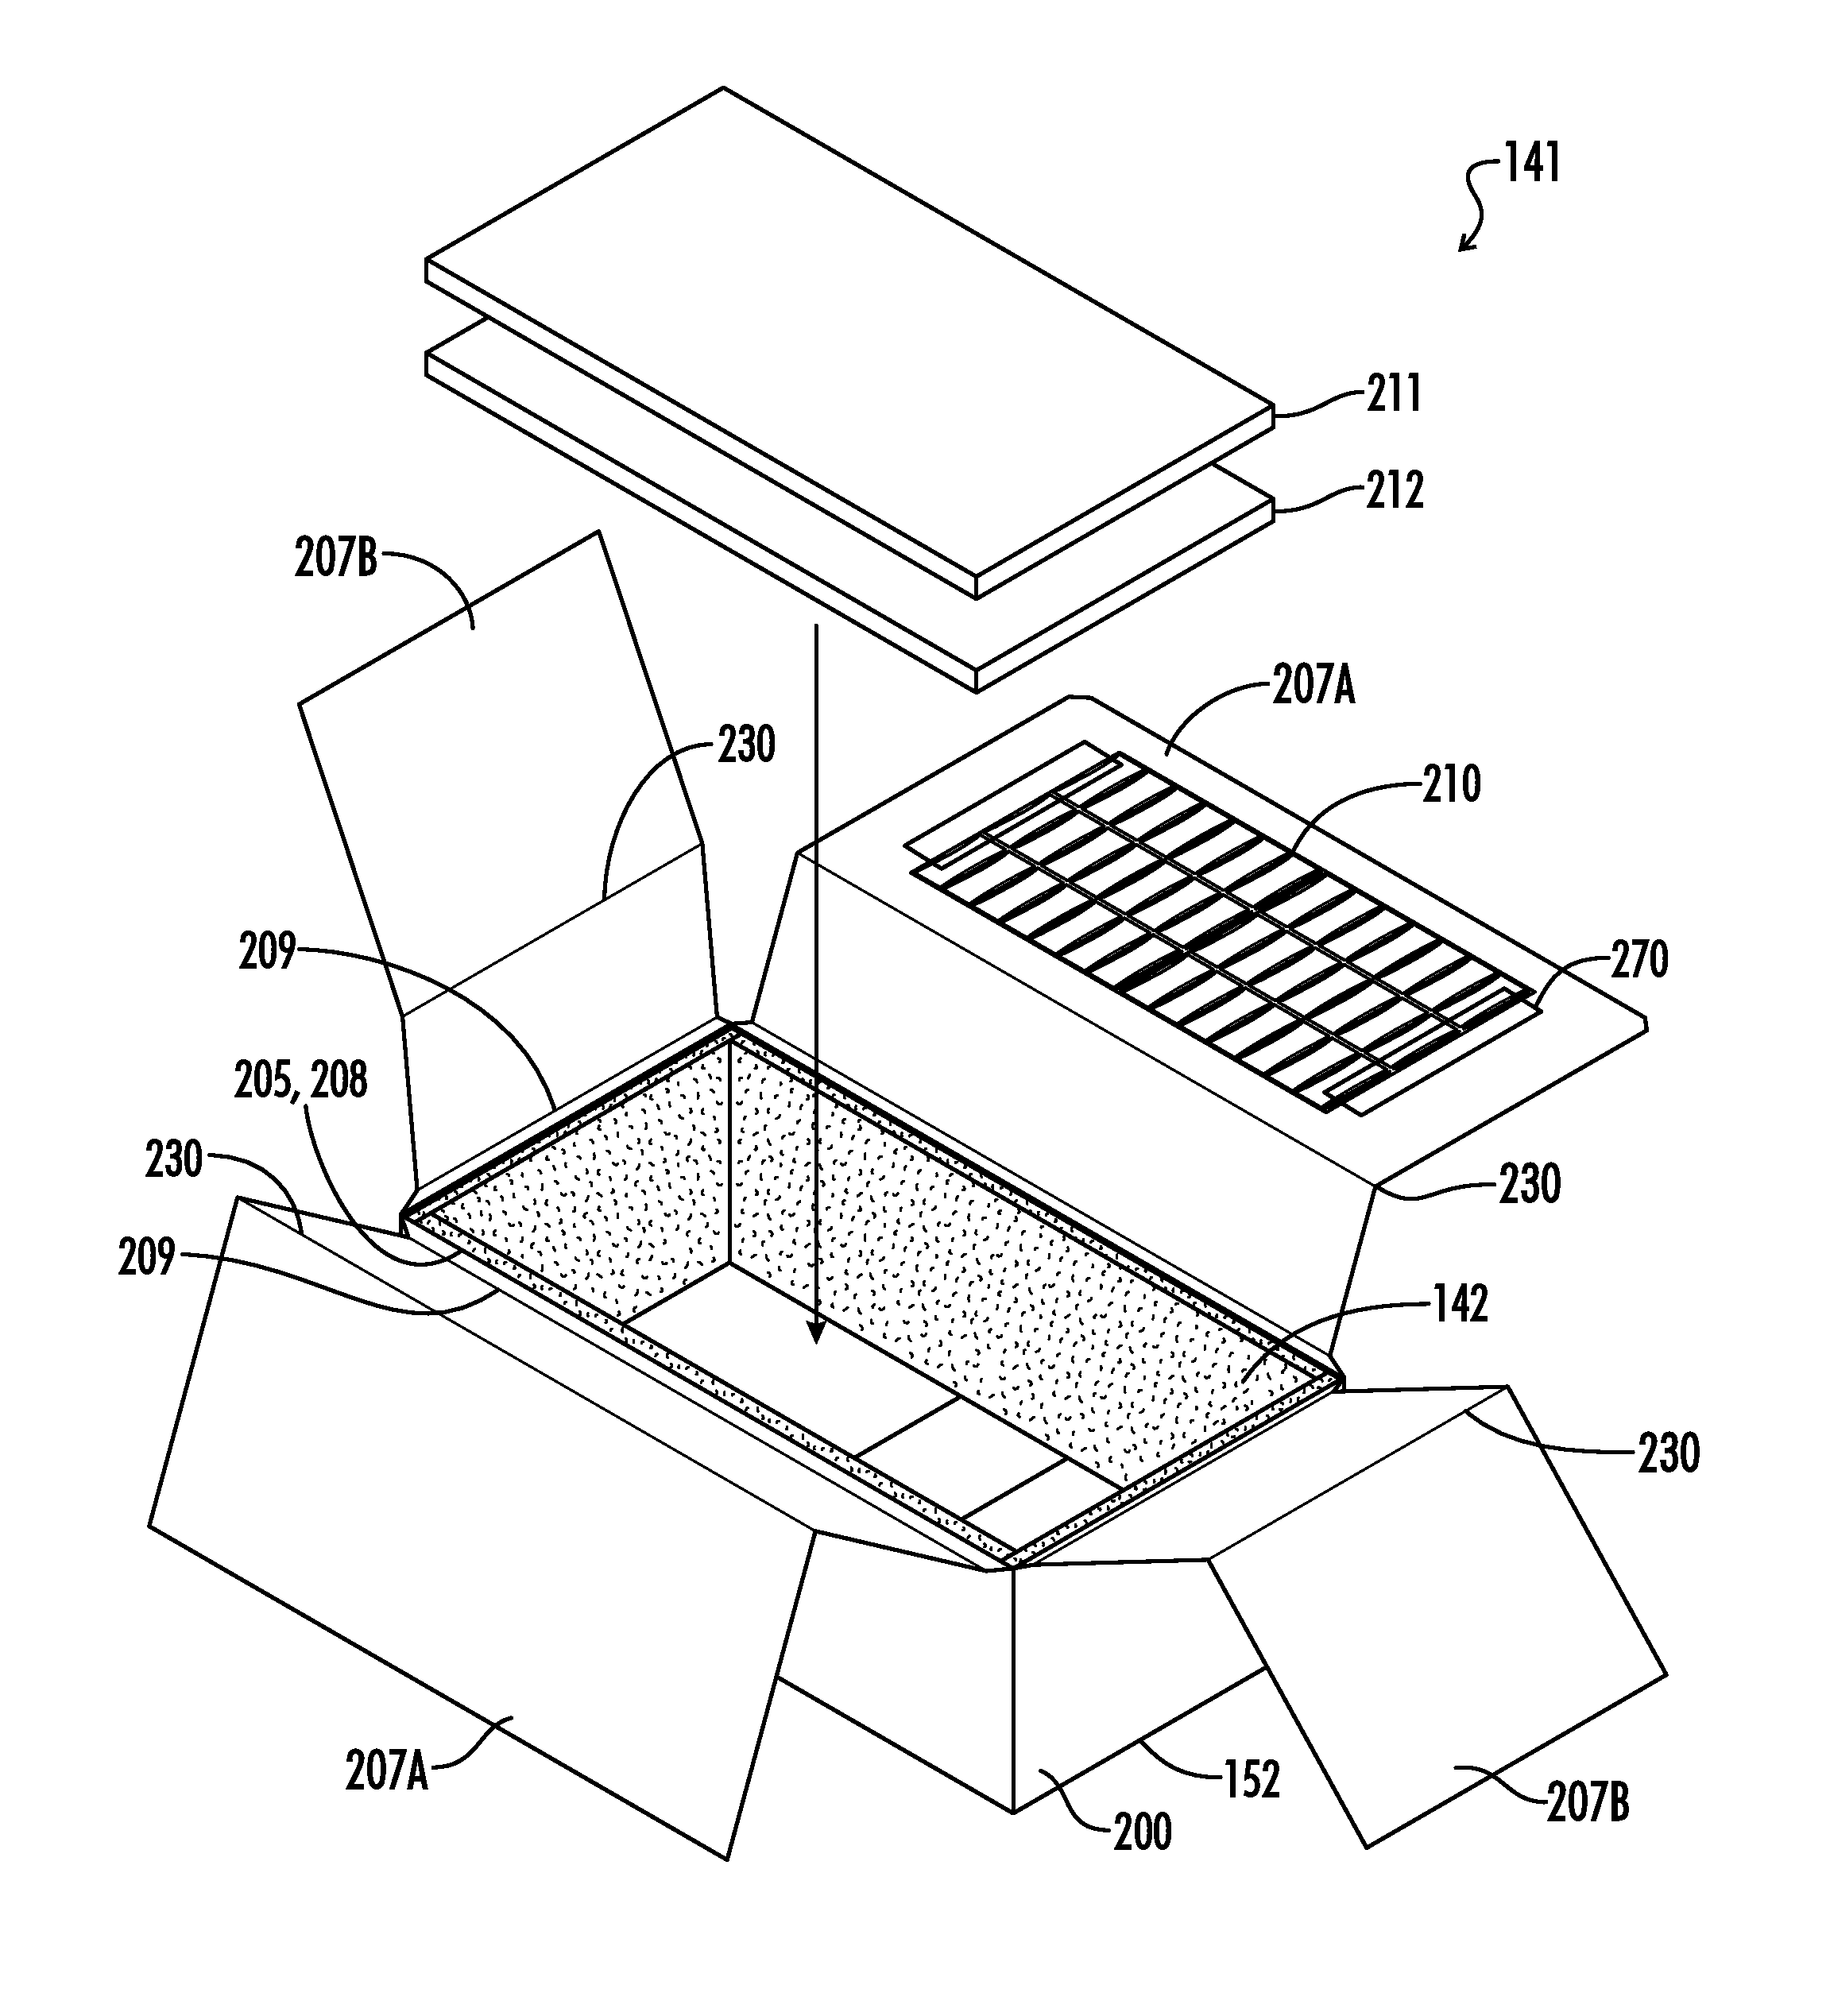 Shipping box system with multiple insulation layers